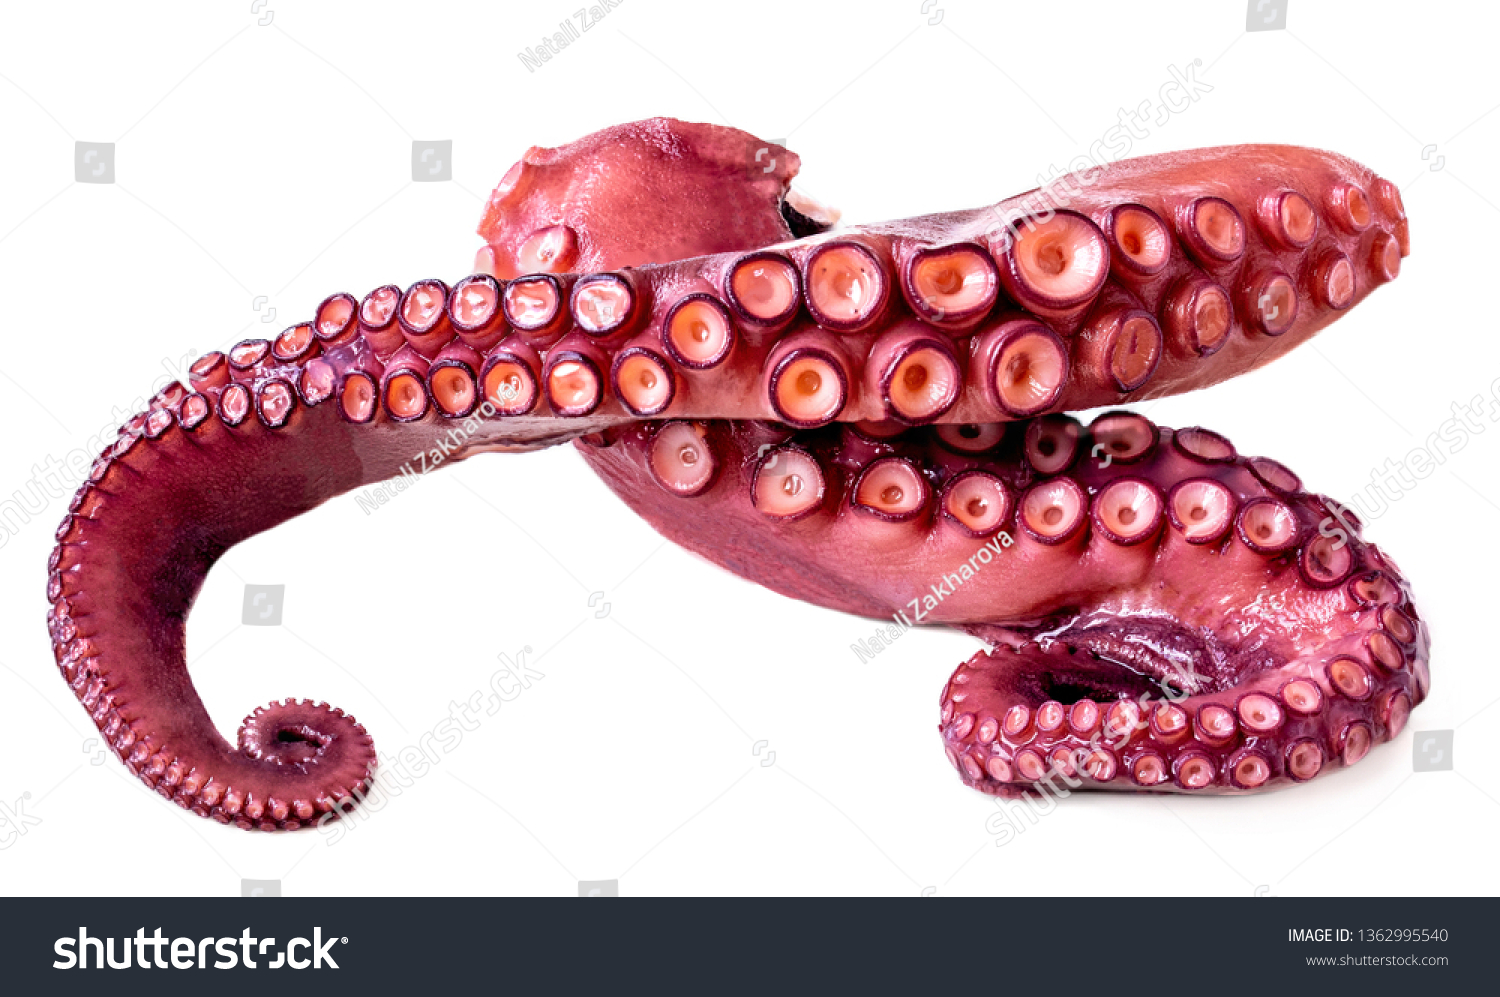 Isolated Octopus. Tentacles of octopus isolated on white background. Seafood concept. #1362995540